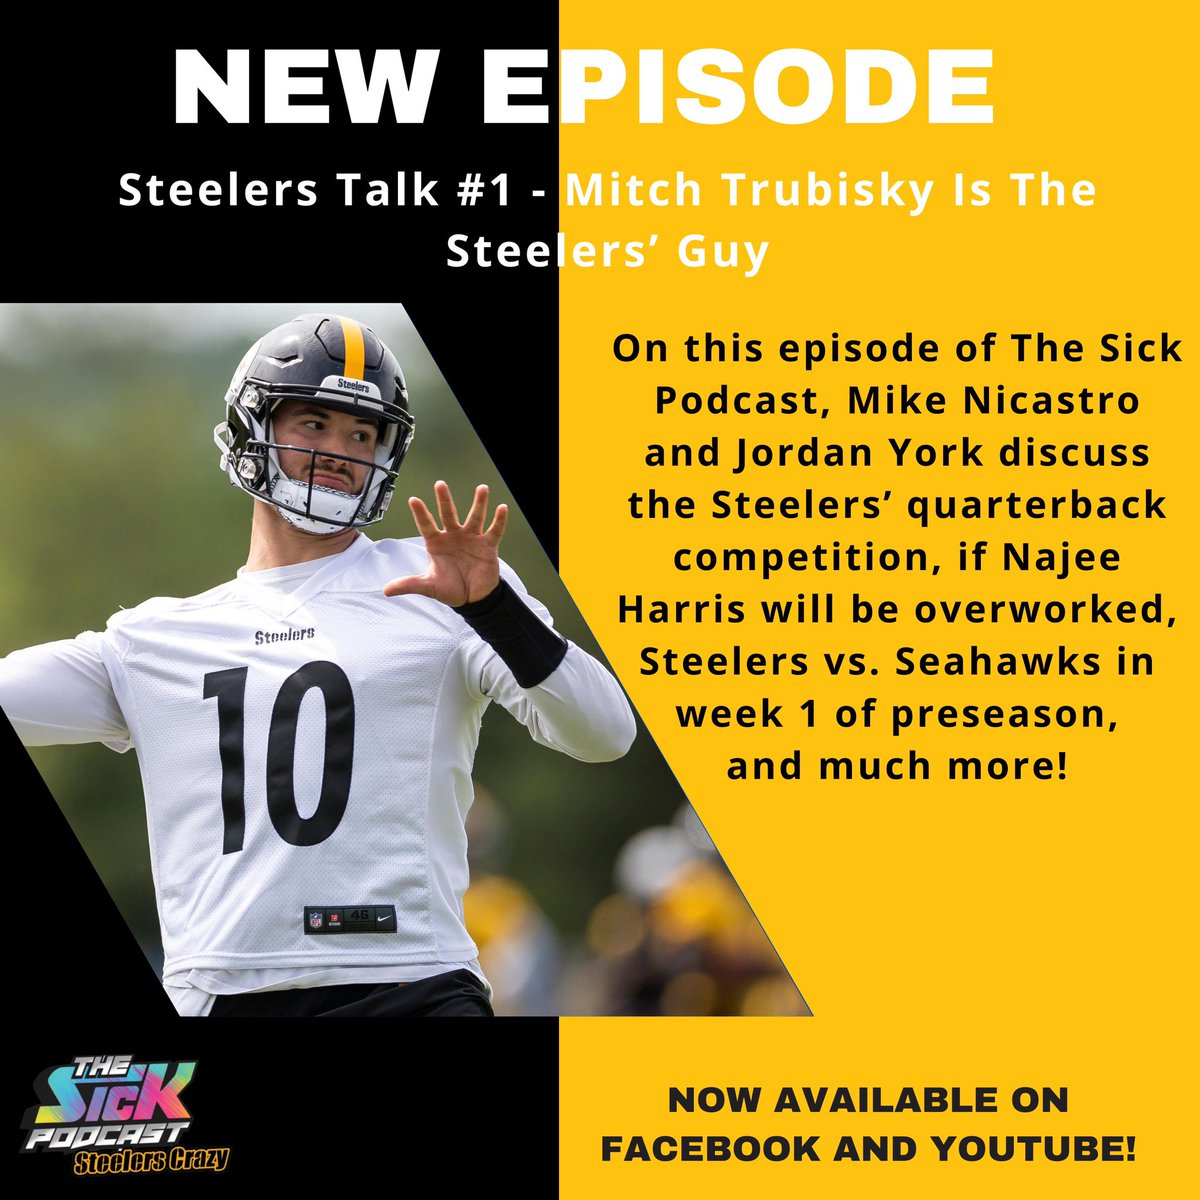 🚨 FIRST EPISODE 🚨 Quarterback battle 👀 Will Najee Harris be overworked? Steelers Vs Seahawks Saturday night 🍿 @MikedUpSports1 & @JordanYorkMusic discuss 👇🏻🎤 Full podcast 👉🏻 youtu.be/mQwQzI4LZV8 #Thesickpodcast #Steelers #SteelersNation